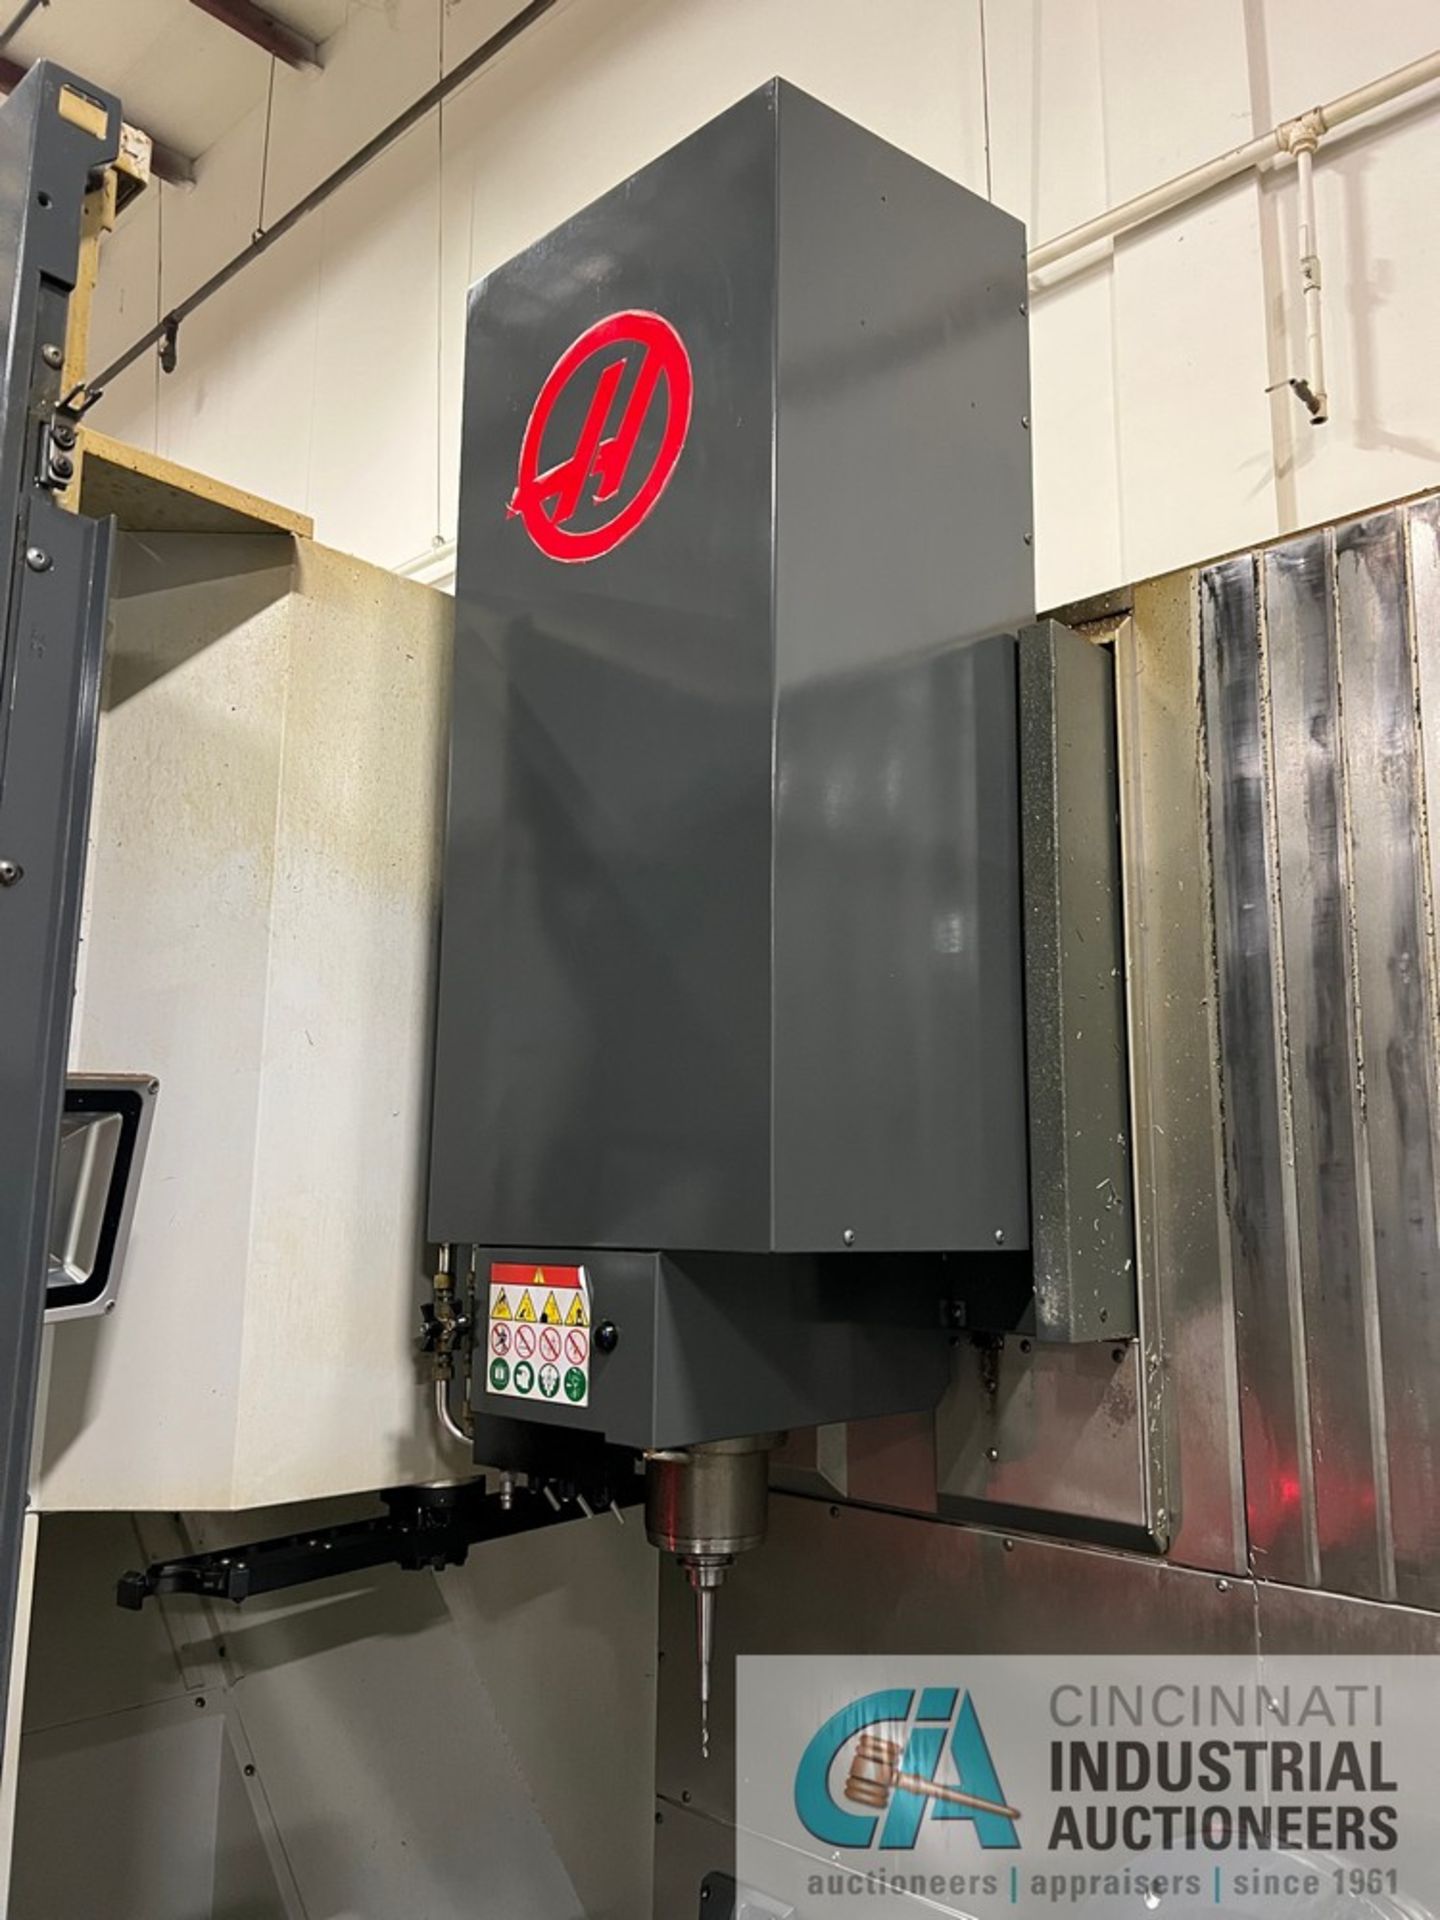 Haas Model UMC-750 Five-Axis CNC Universal Machining Center (2017) 6,578 Cutting Hours Showing - Image 4 of 19